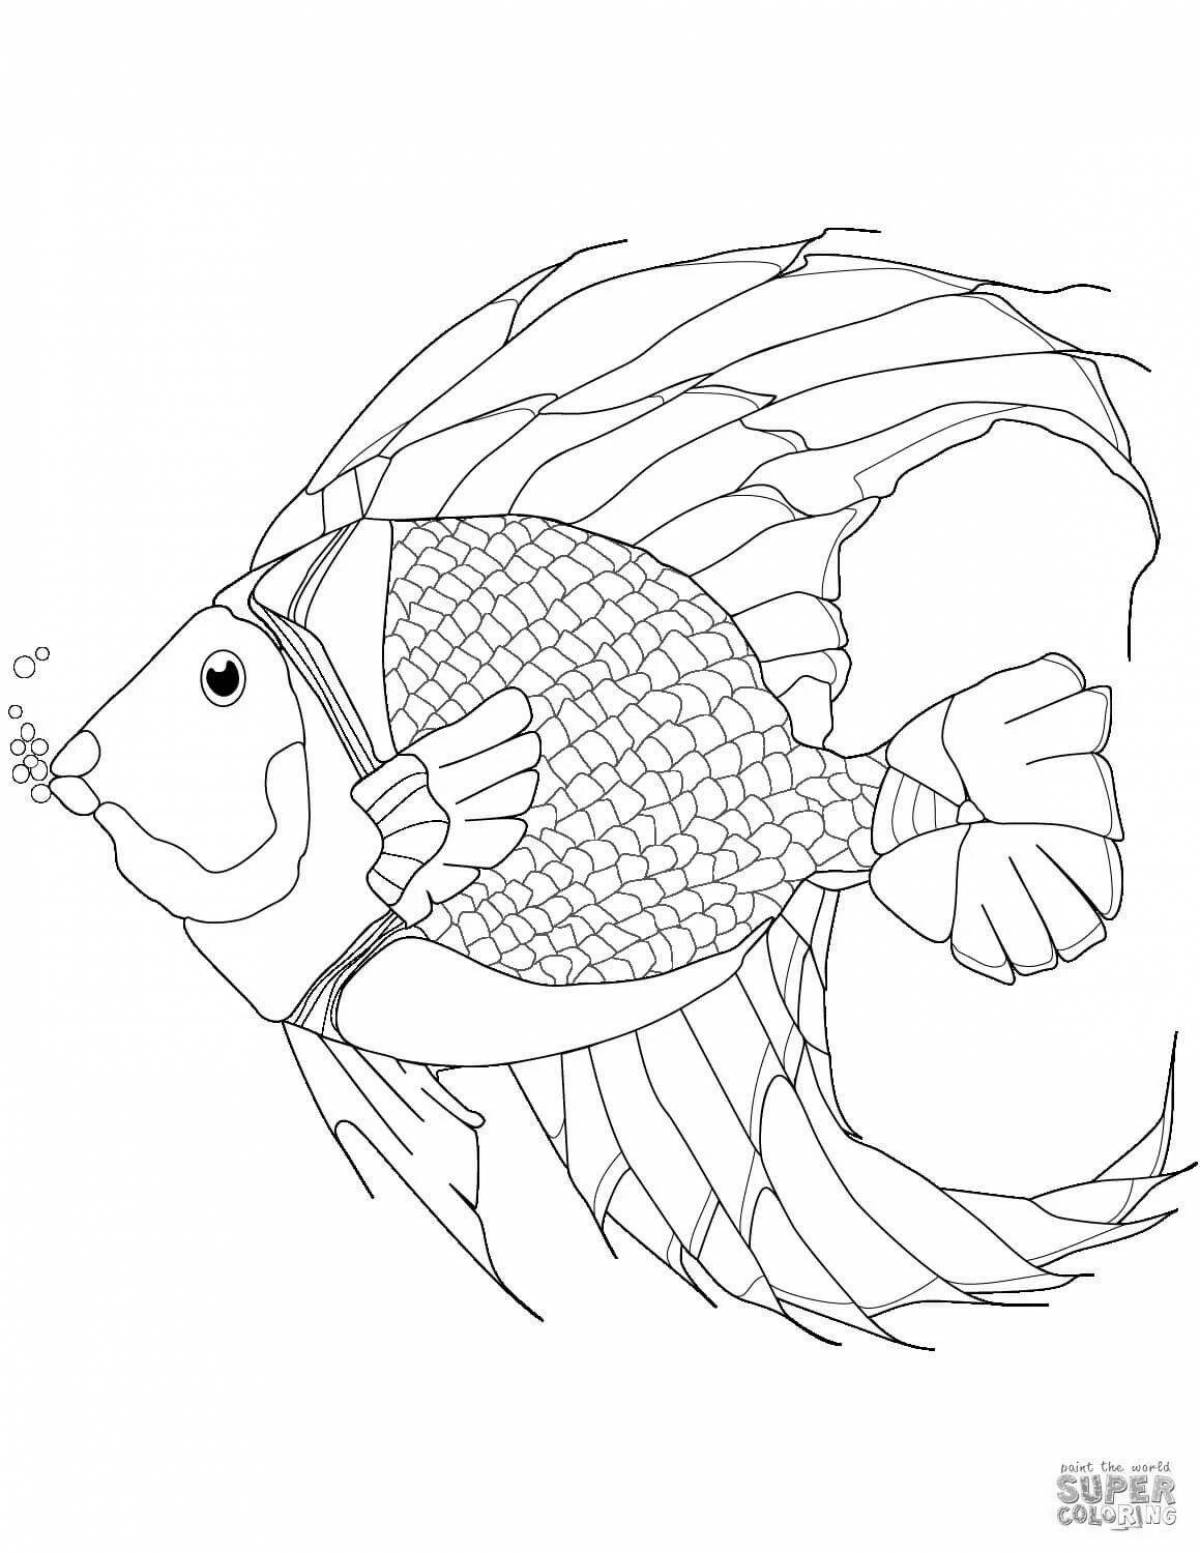 Attractive parrot fish coloring page